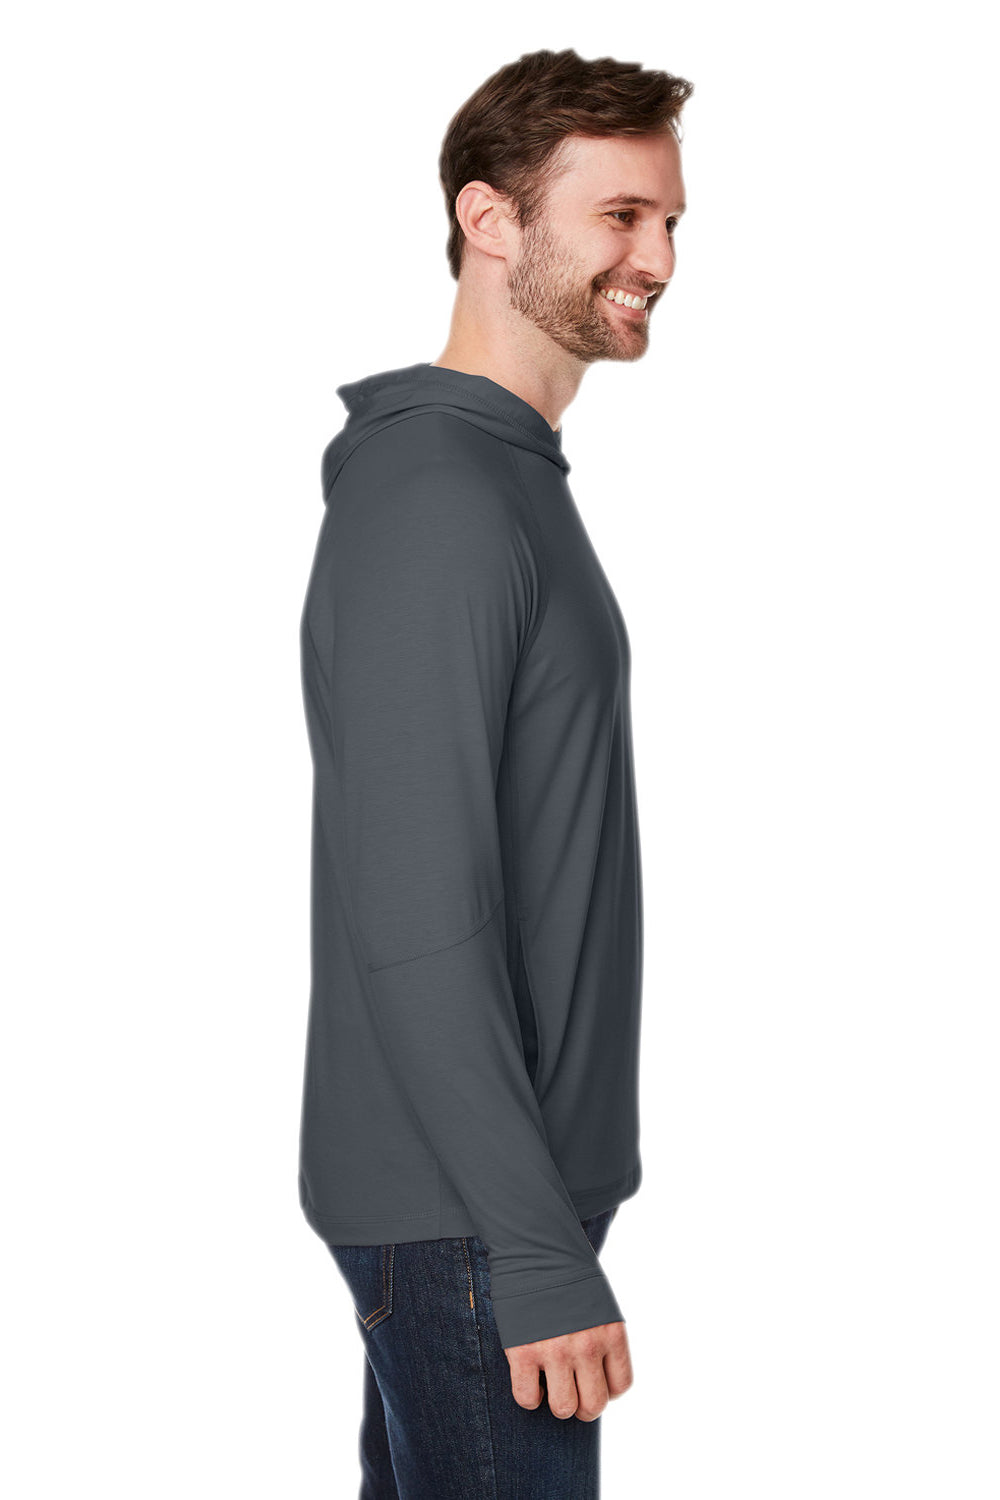 North End NE105 Mens Jaq Stretch Performance Hooded T-Shirt Hoodie Carbon Grey Side